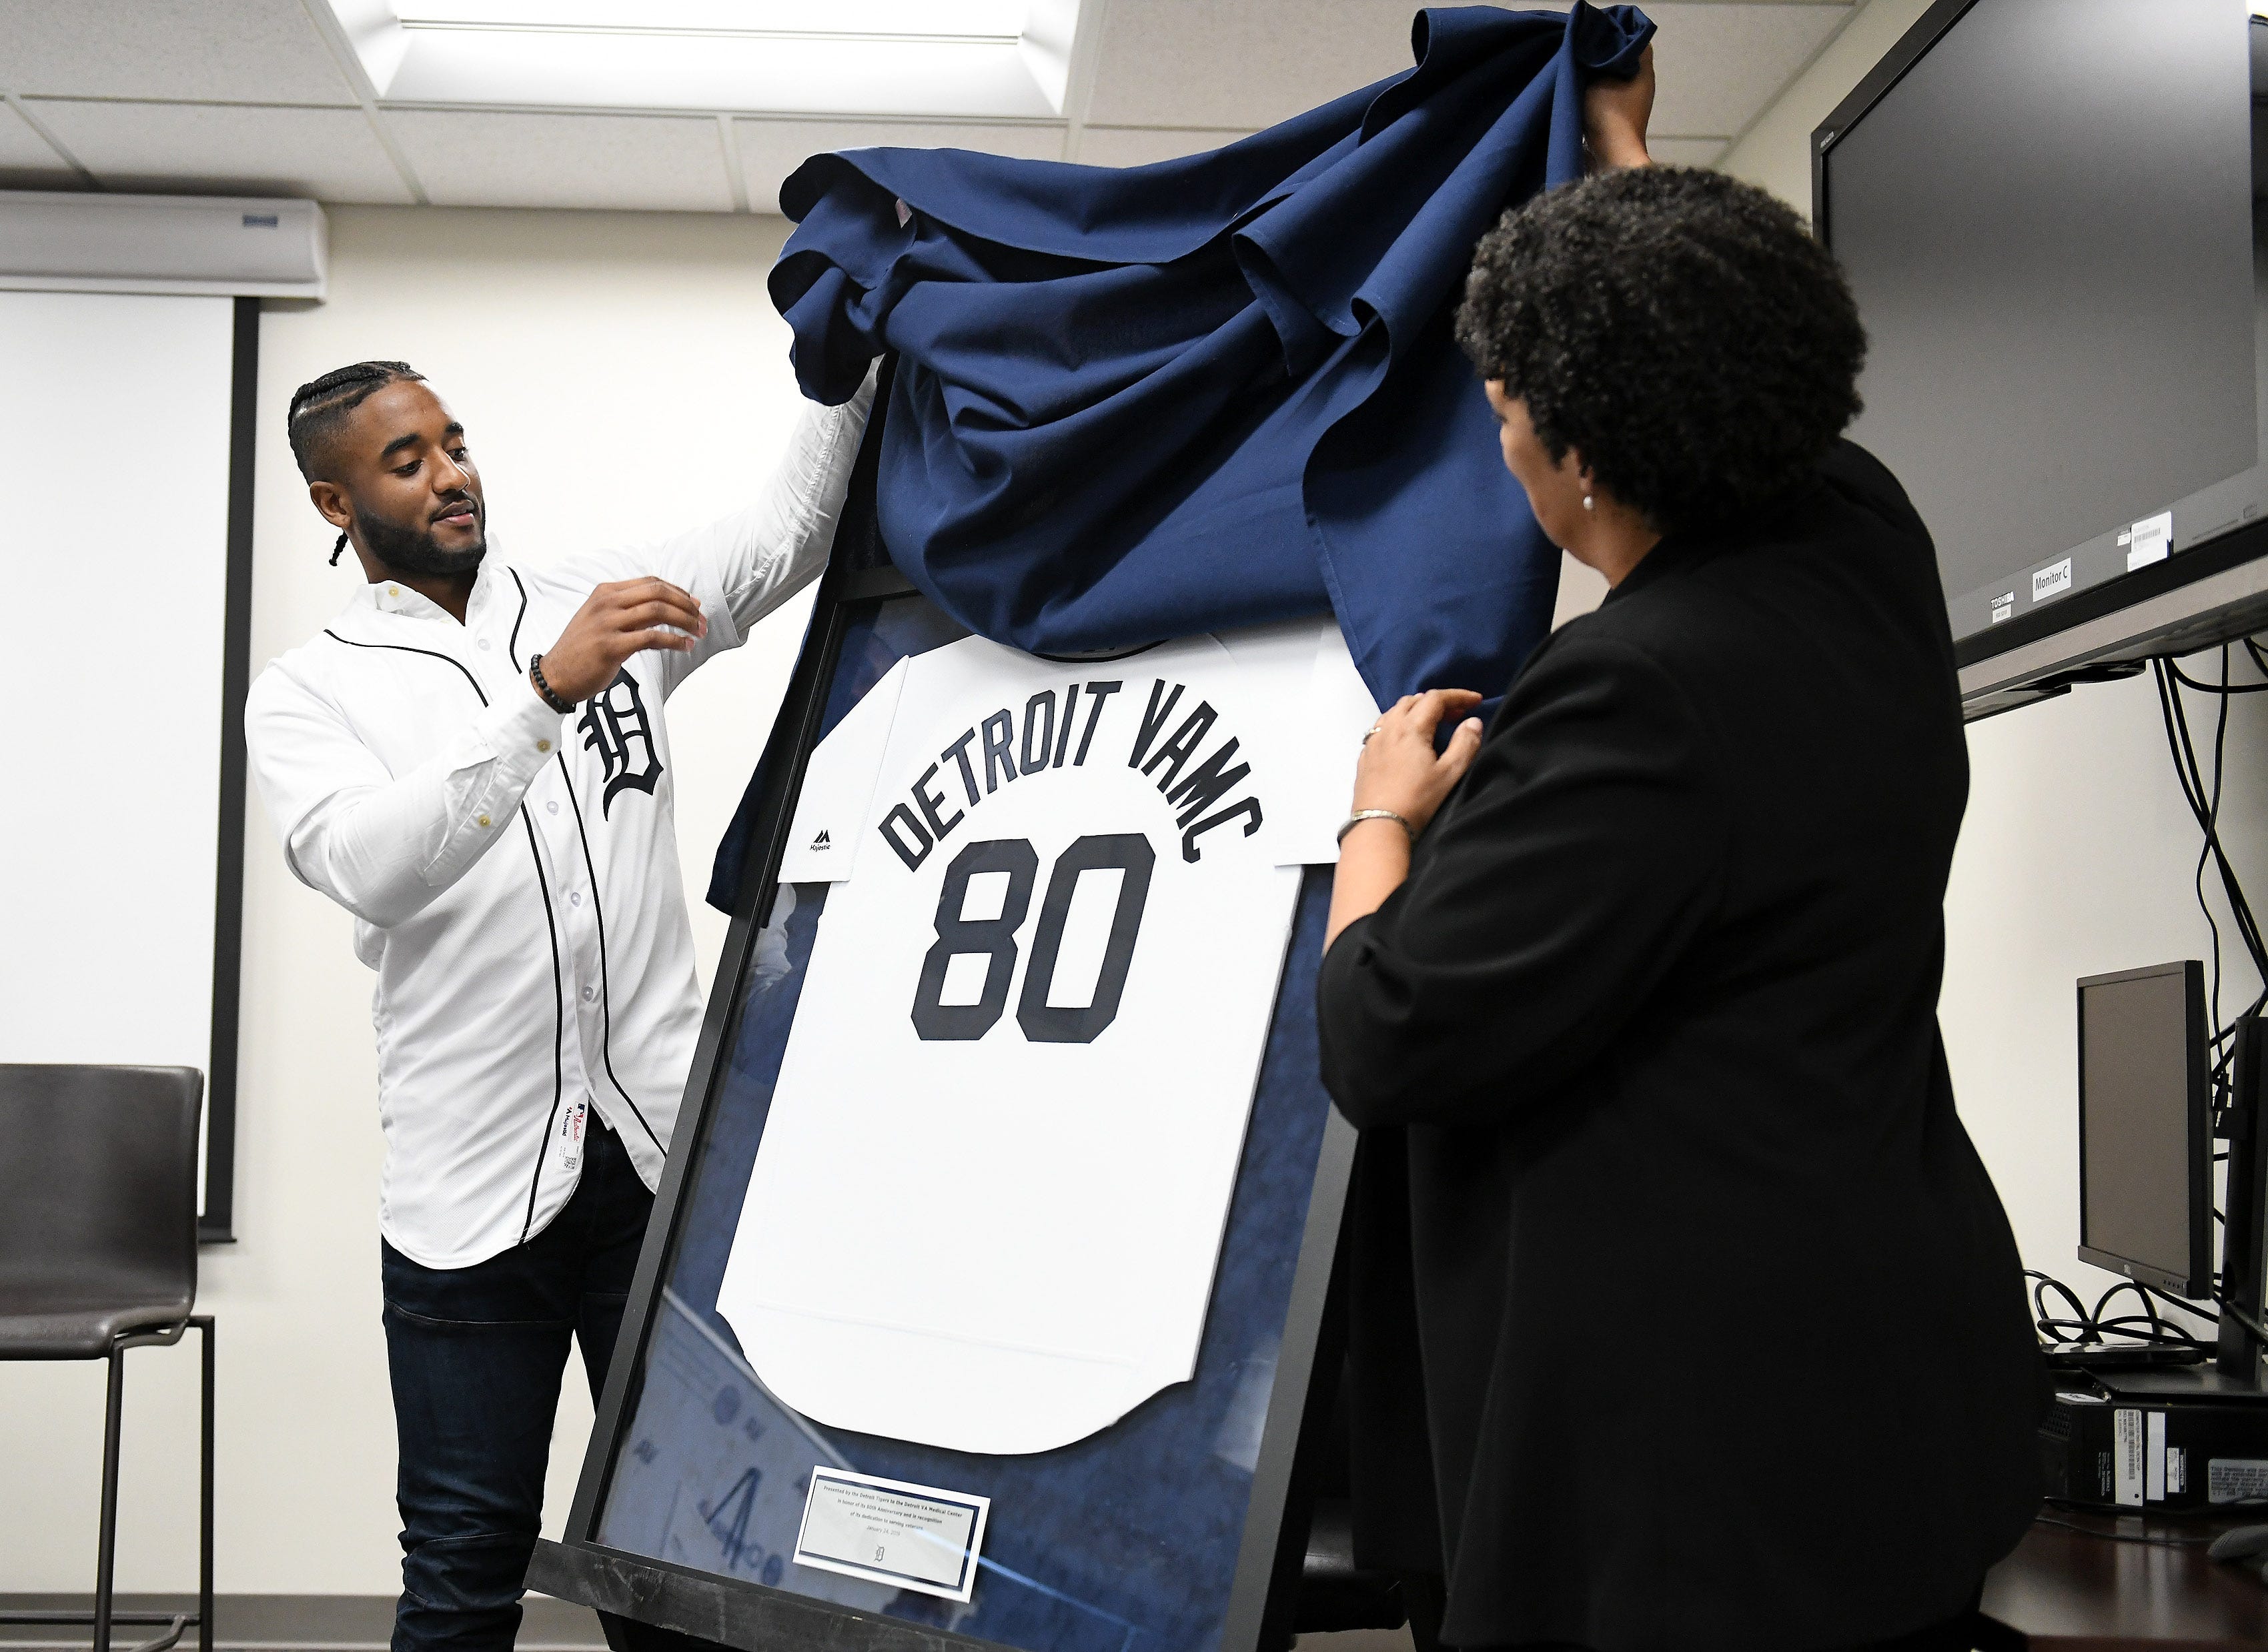 Tigers' Niko Goodrum, left, and John D. Dingell VA Medical Center director Pamela J. Reeves, MD, unveil a special jersey celebrating 80 years of service by the Detroit VA Medical Center during a stop on the 2019 Detroit Tigers Winter Caravan at the John D. Dingell VA Medical Center in Detroit on Jan. 24, 2019.